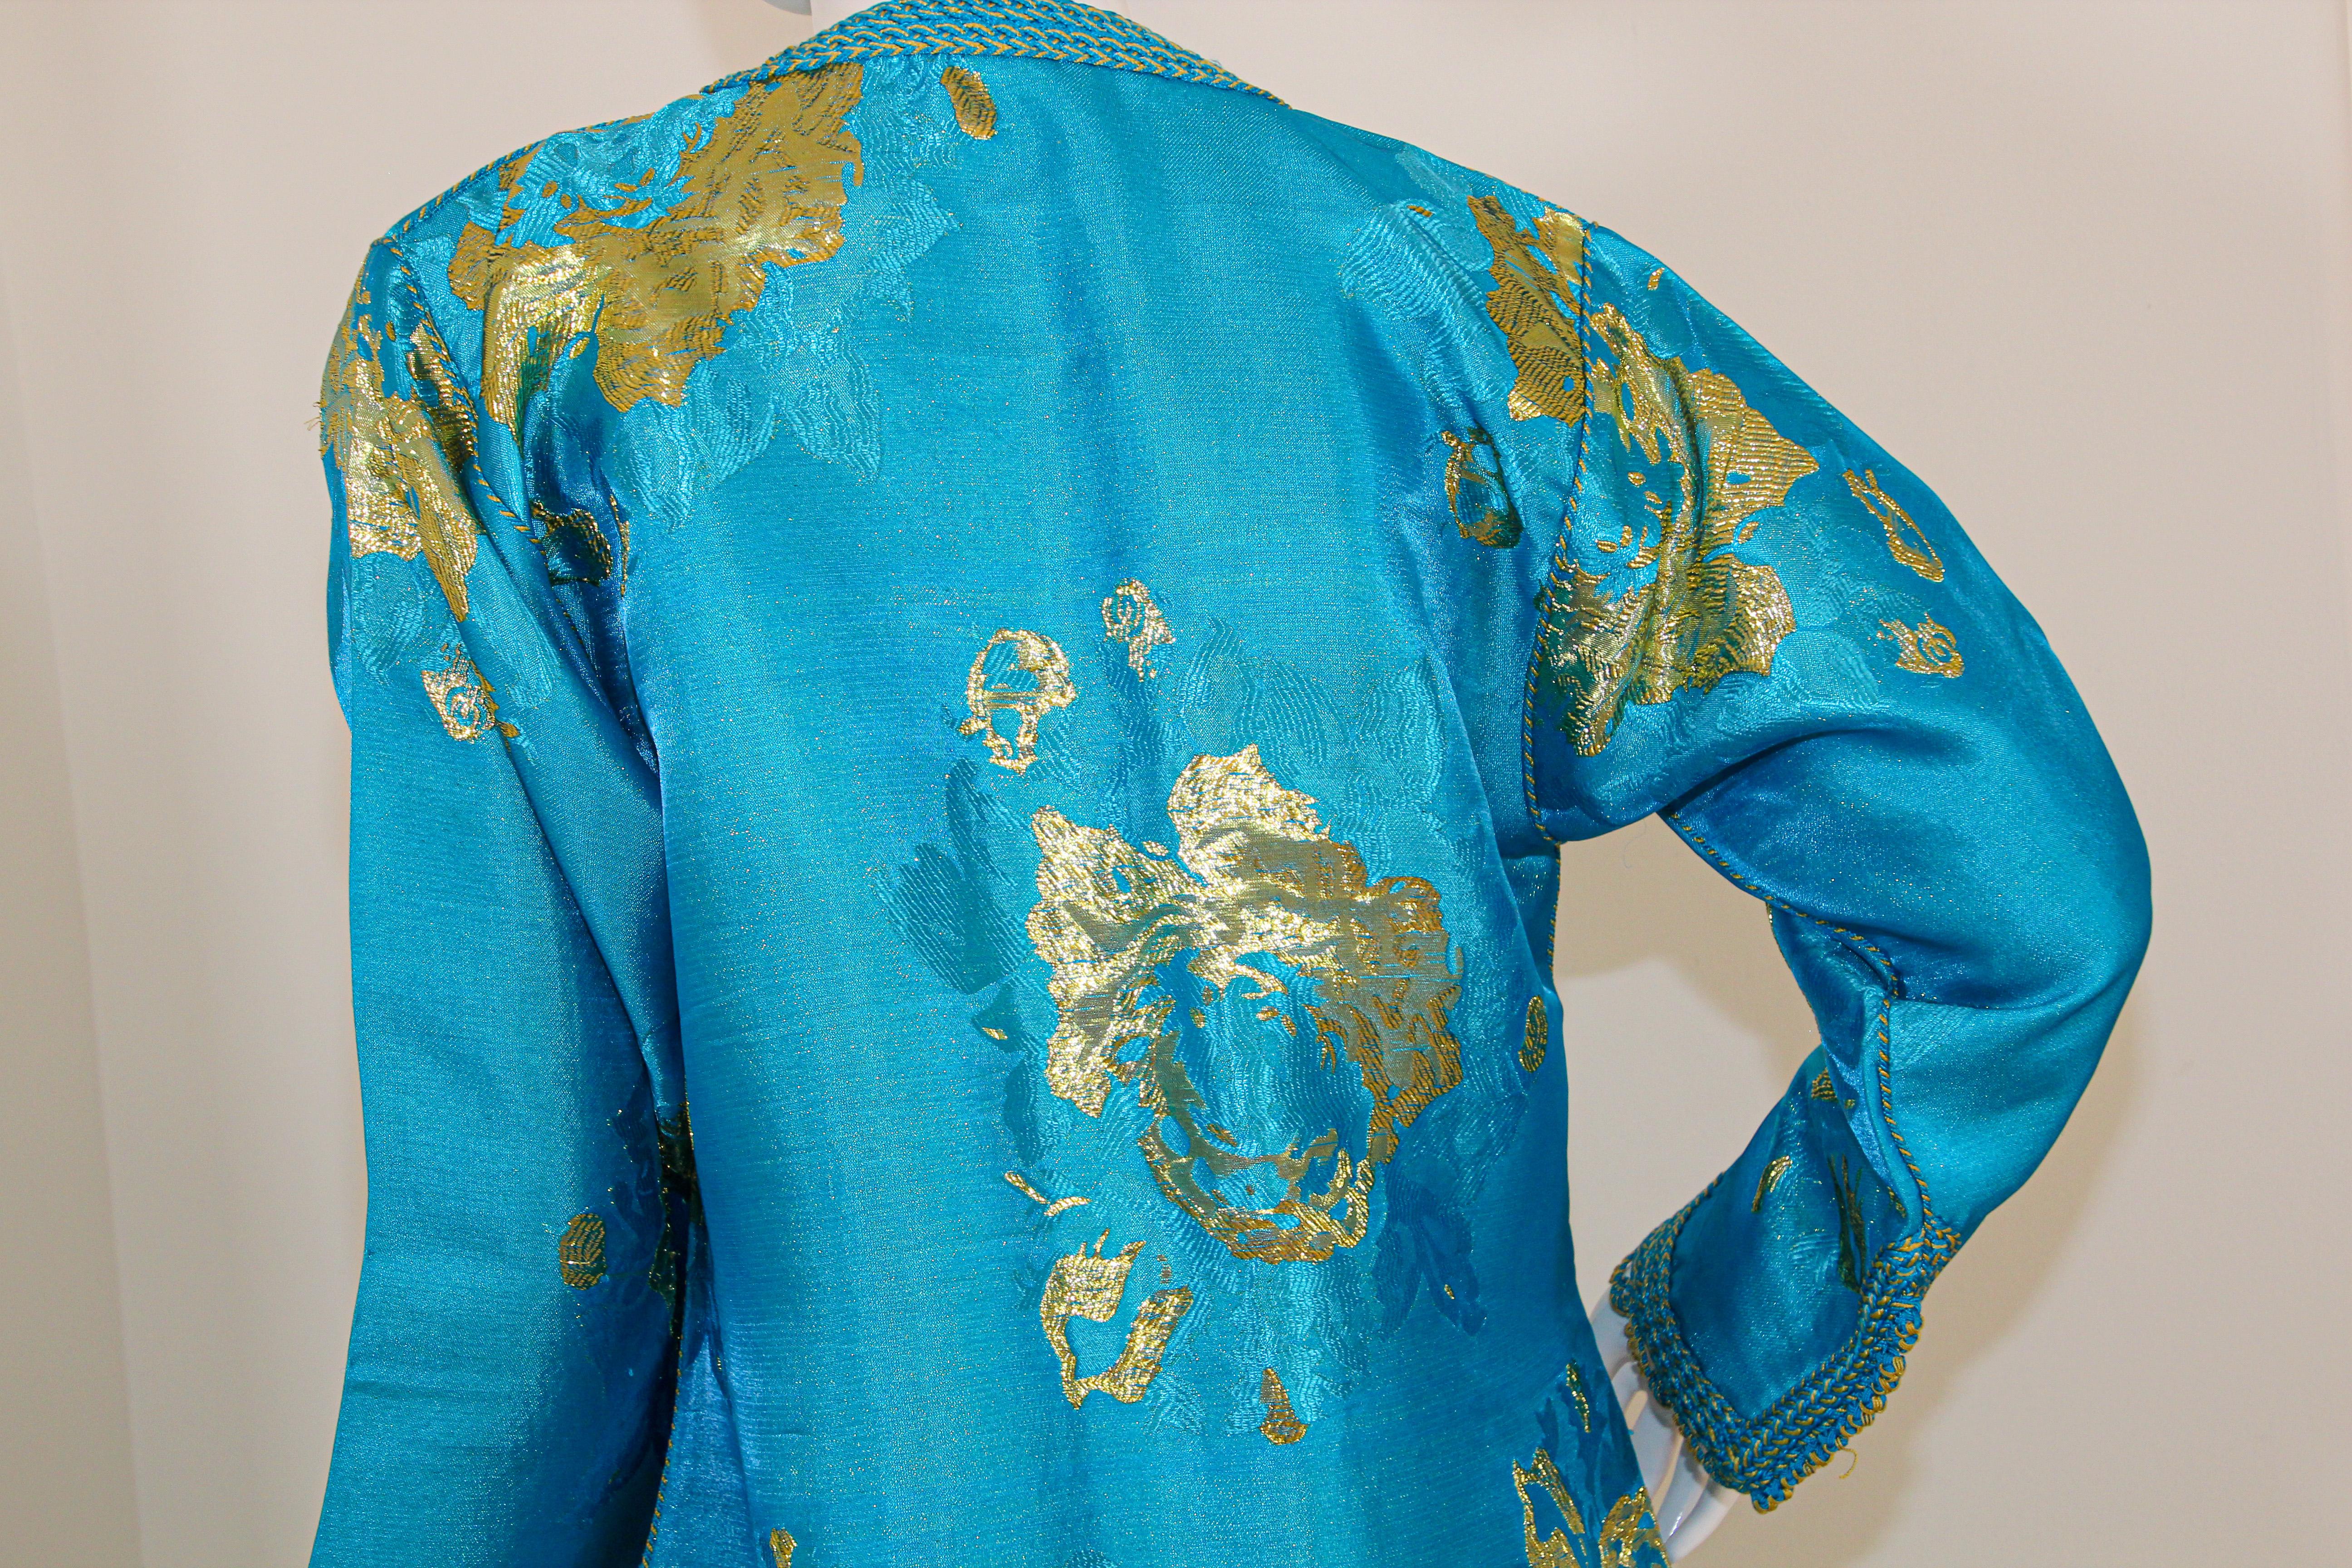 Moroccan Vintage Kaftan in Turquoise and Gold Floral Brocade Metallic Lame 4